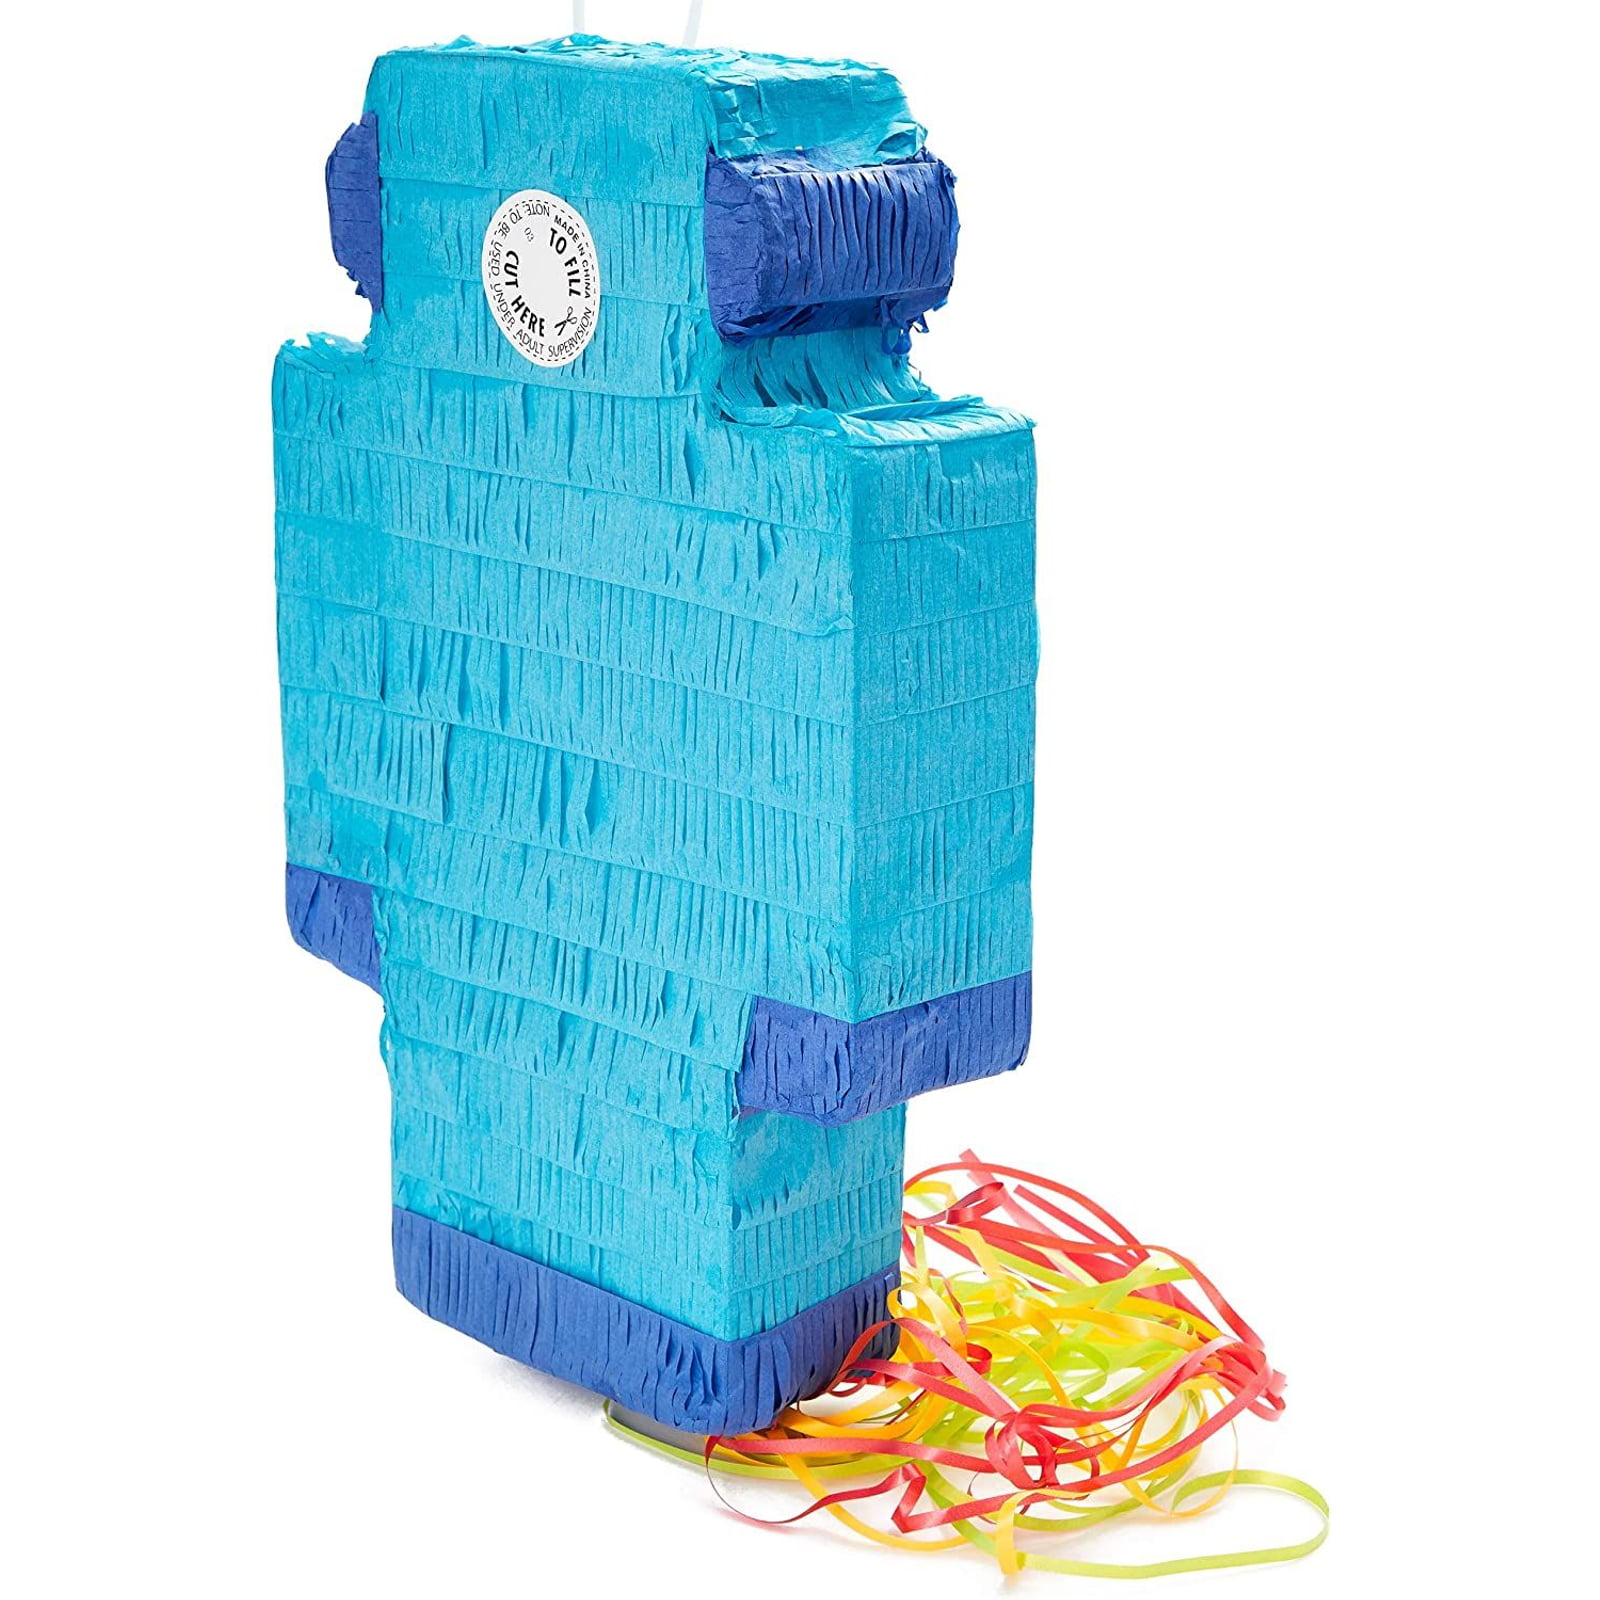 16.6 x 10.8 in. Robot Pinata for Kids Birthday Party 